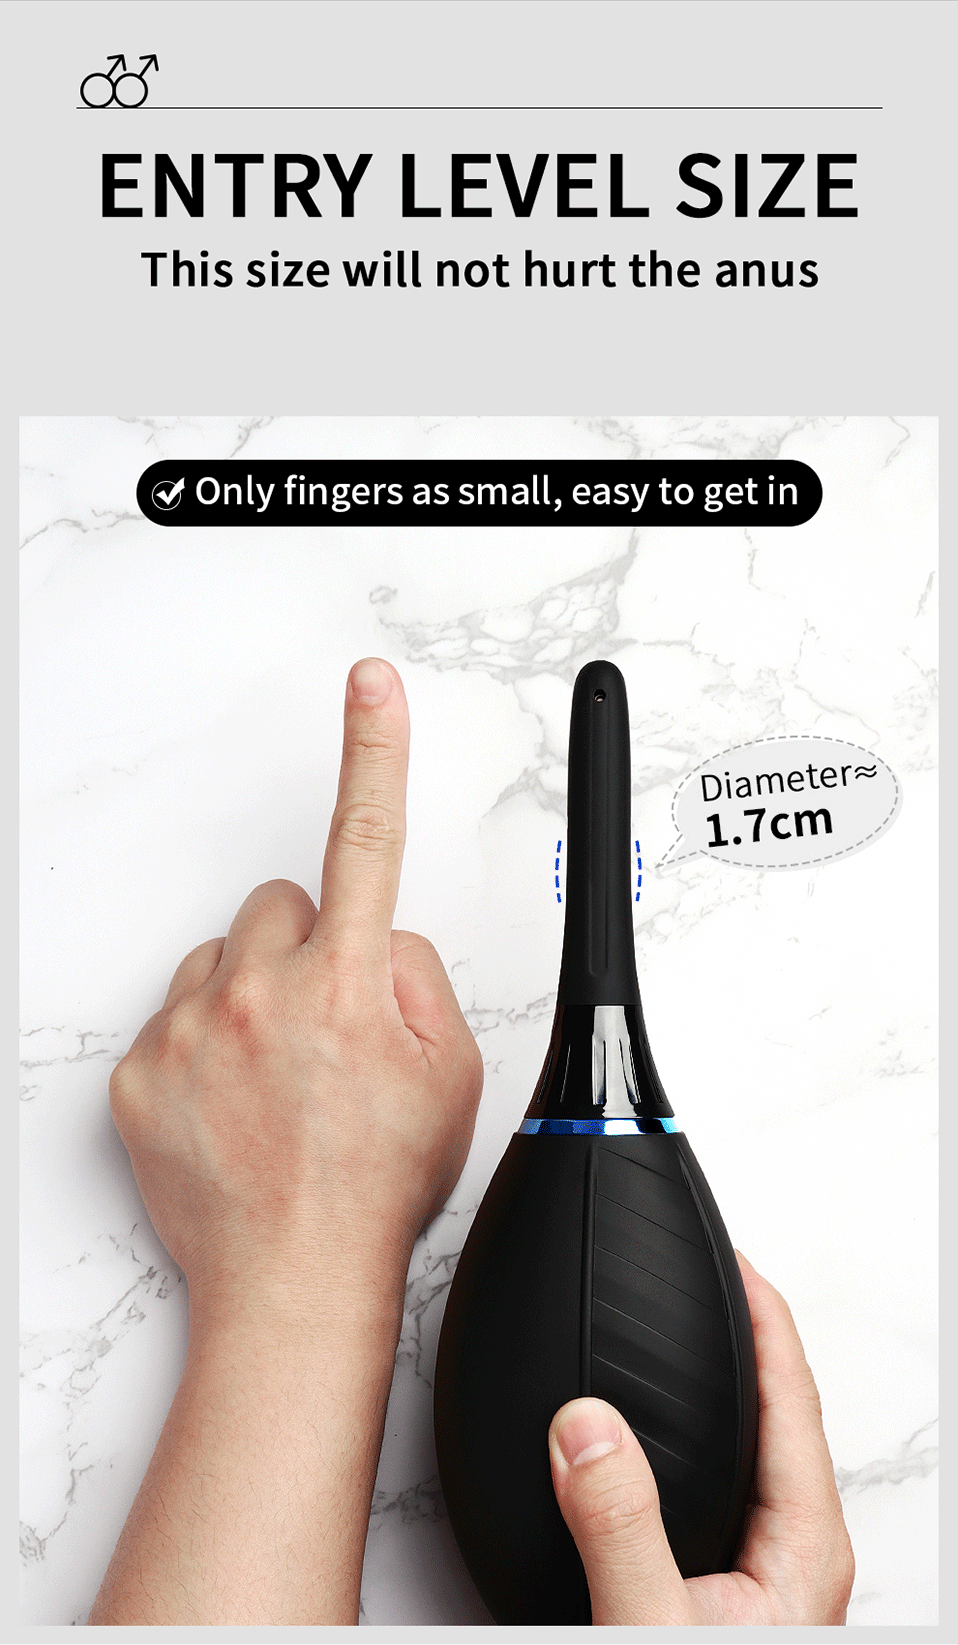 Black silicone anal douche for men and women. 8.7*1.7cm easy to insert without pain. Safe and comfortable anus-cleaning joy.